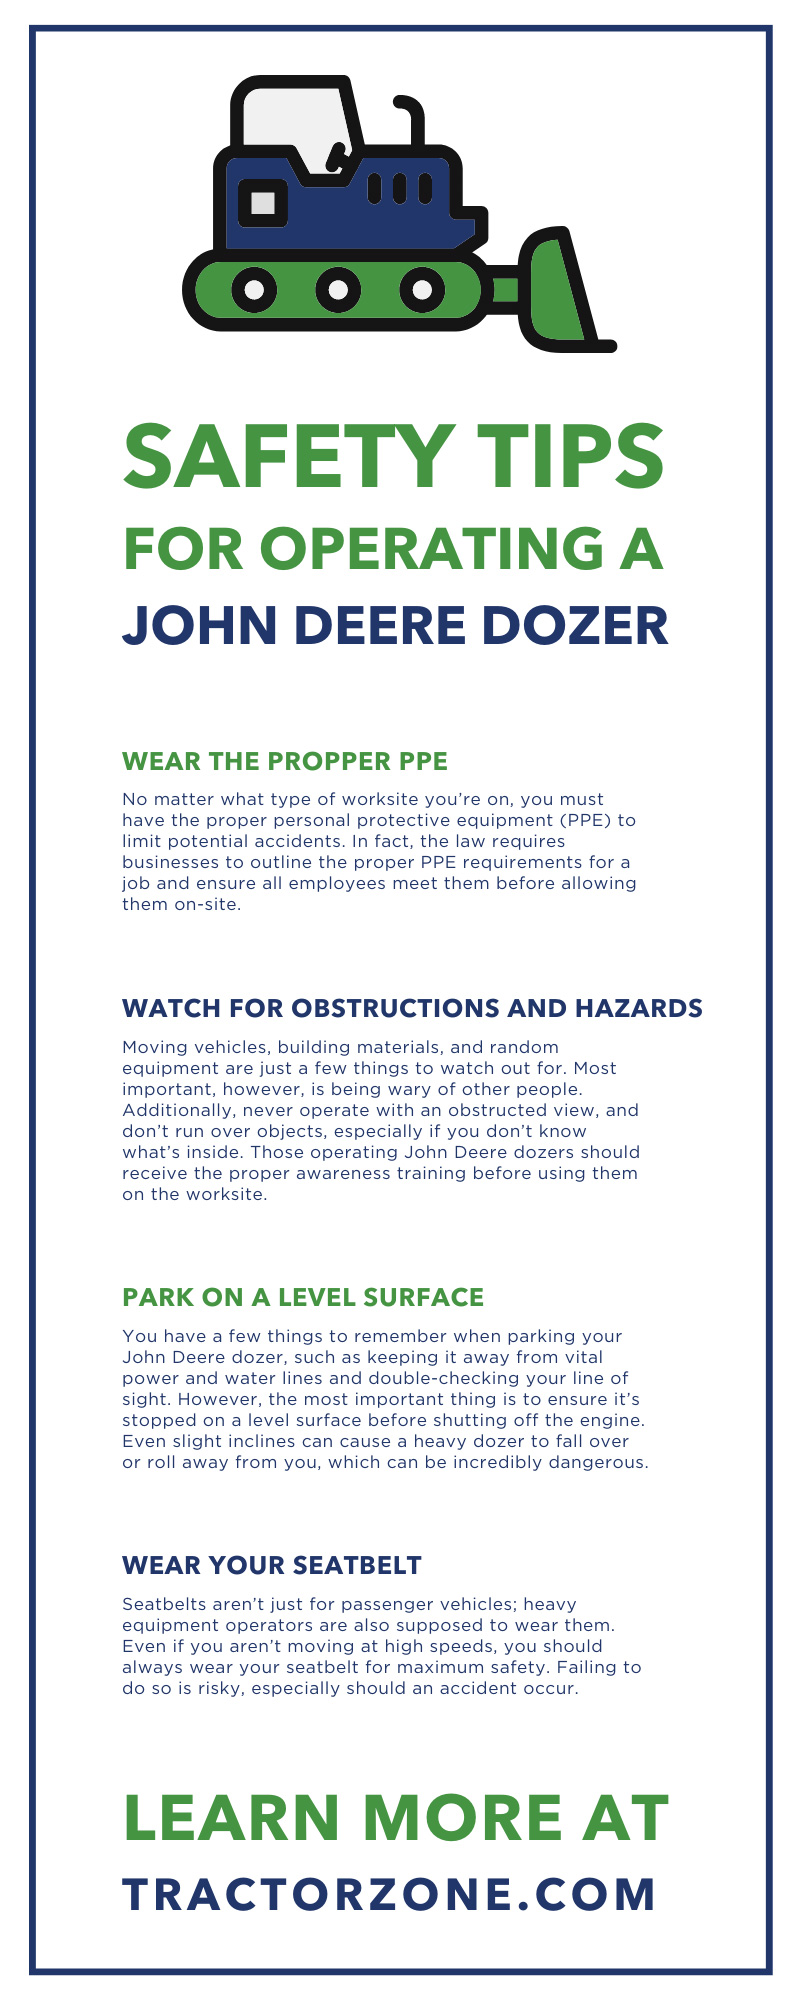 7 Safety Tips for Operating a John Deere Dozer